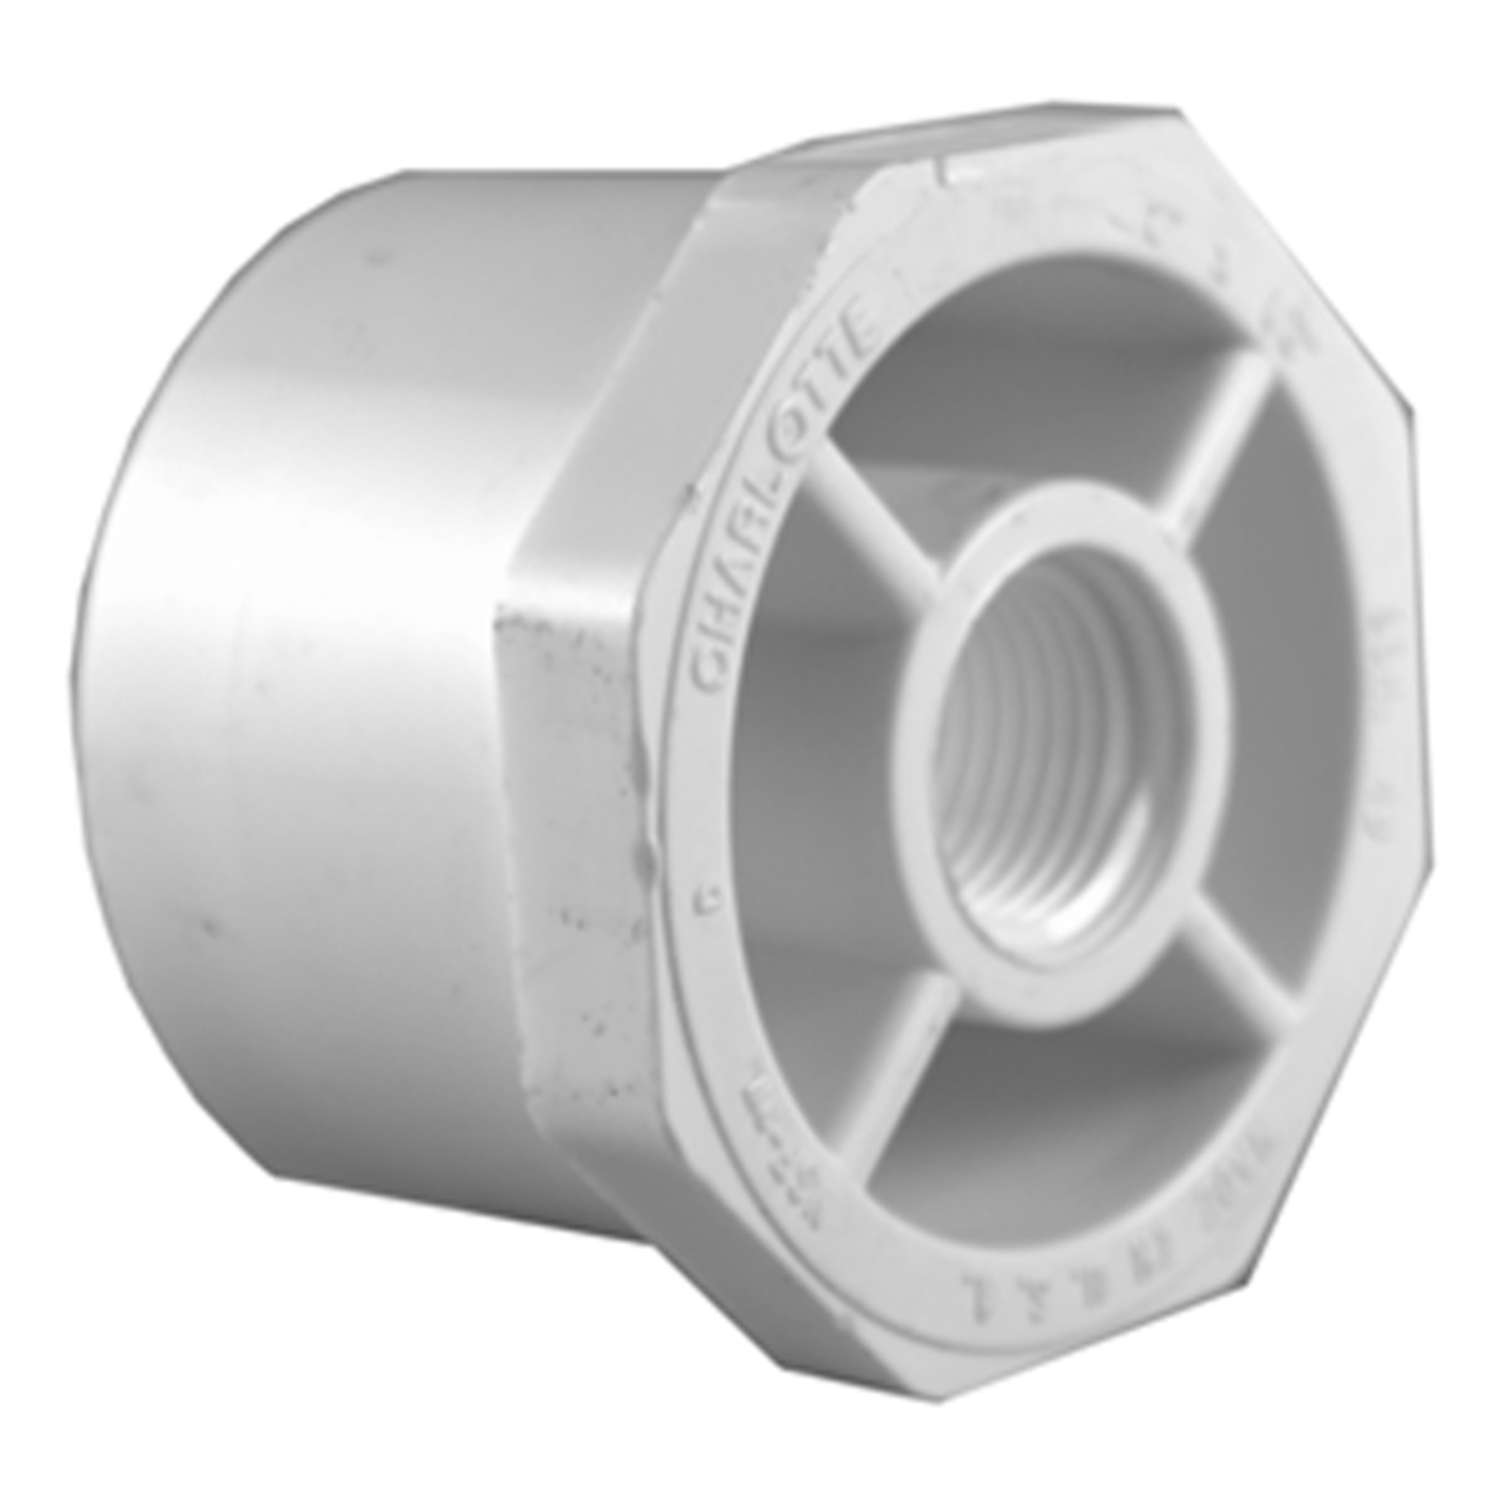 PVC DWV Hub Bushing with Underground Use x 12 in Pipe Increaser Reducer 4 in 